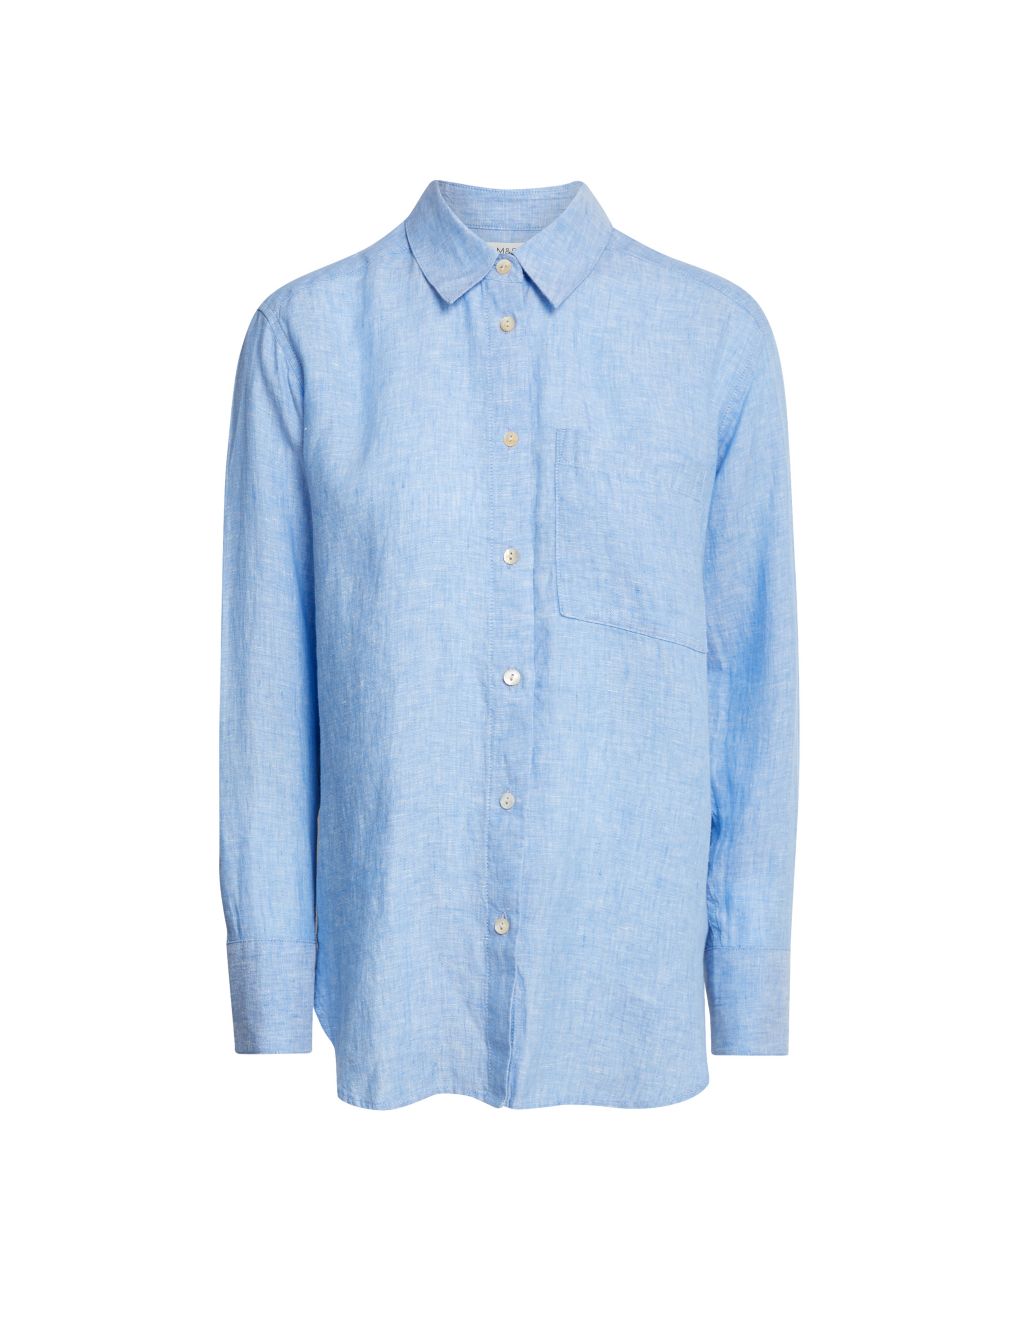 Pure Linen Striped Collared Relaxed Shirt image 2